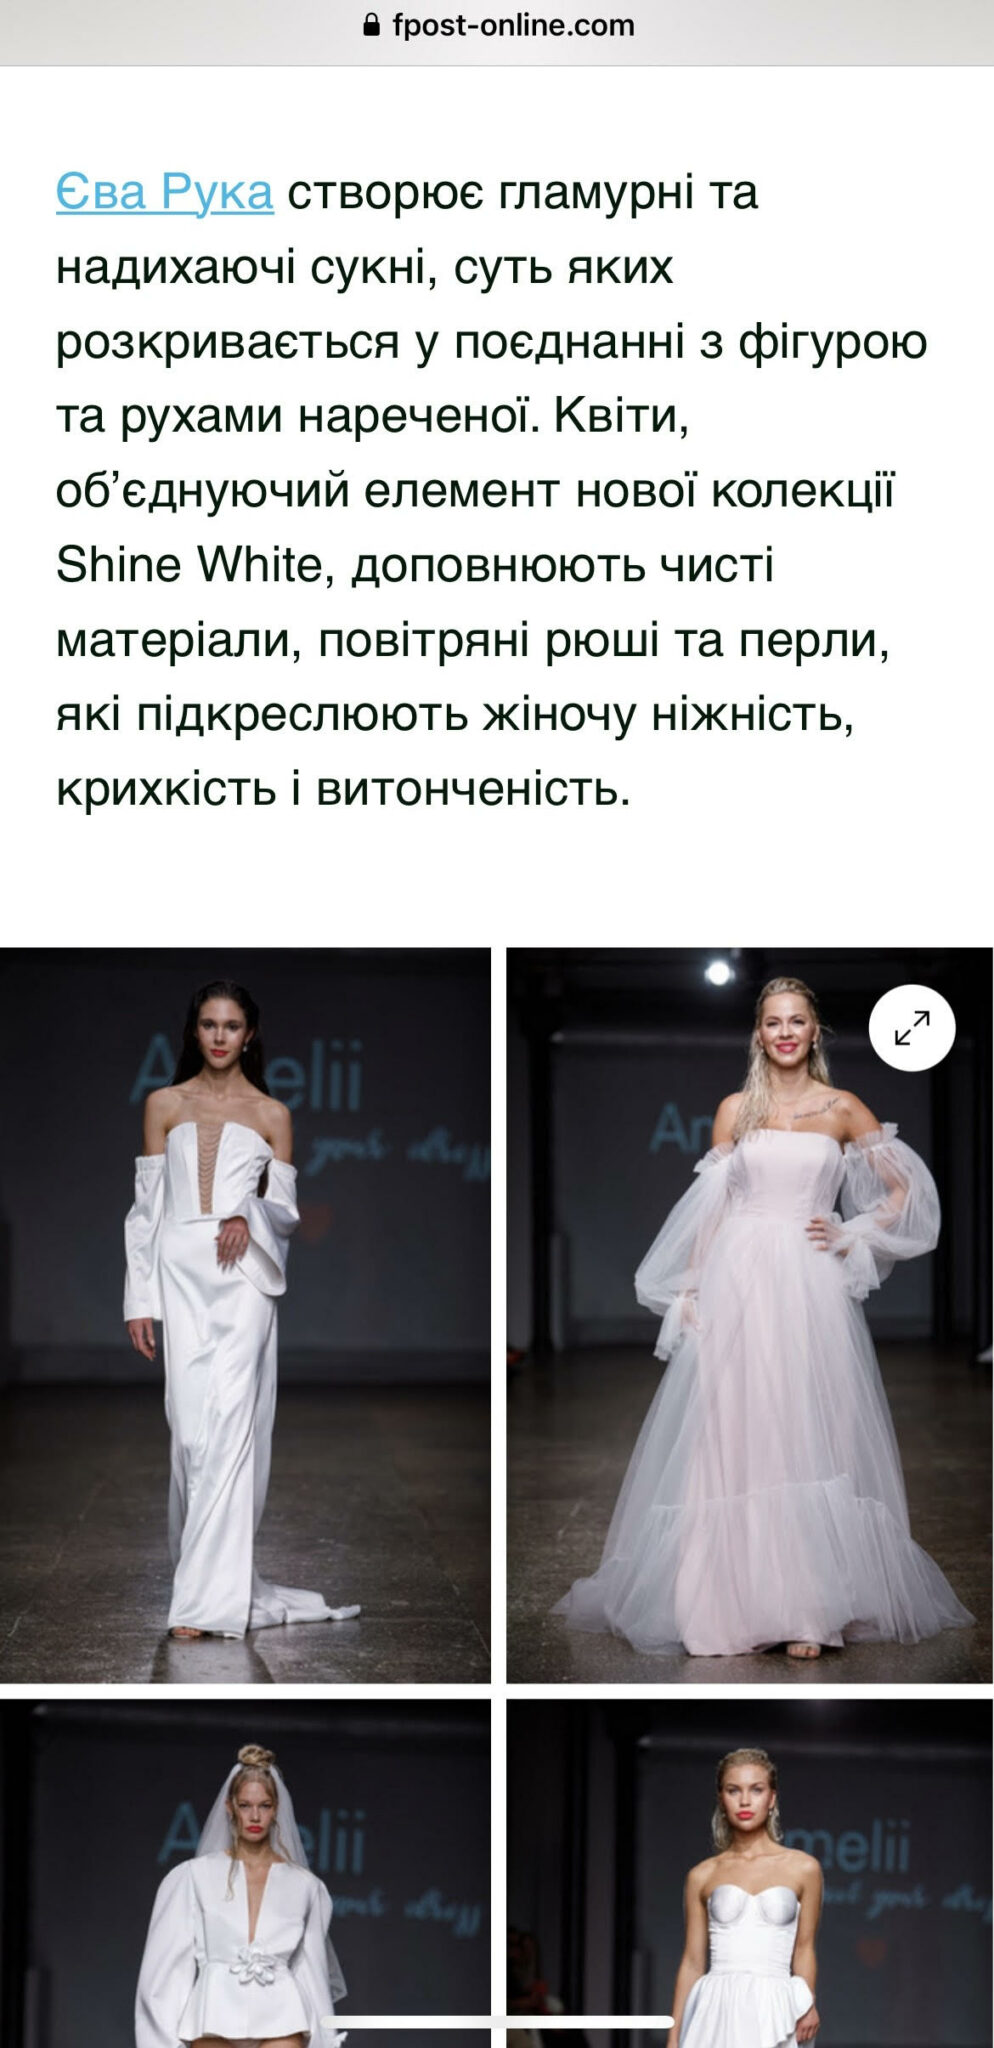 Amelii in Ukranian Fashion Page